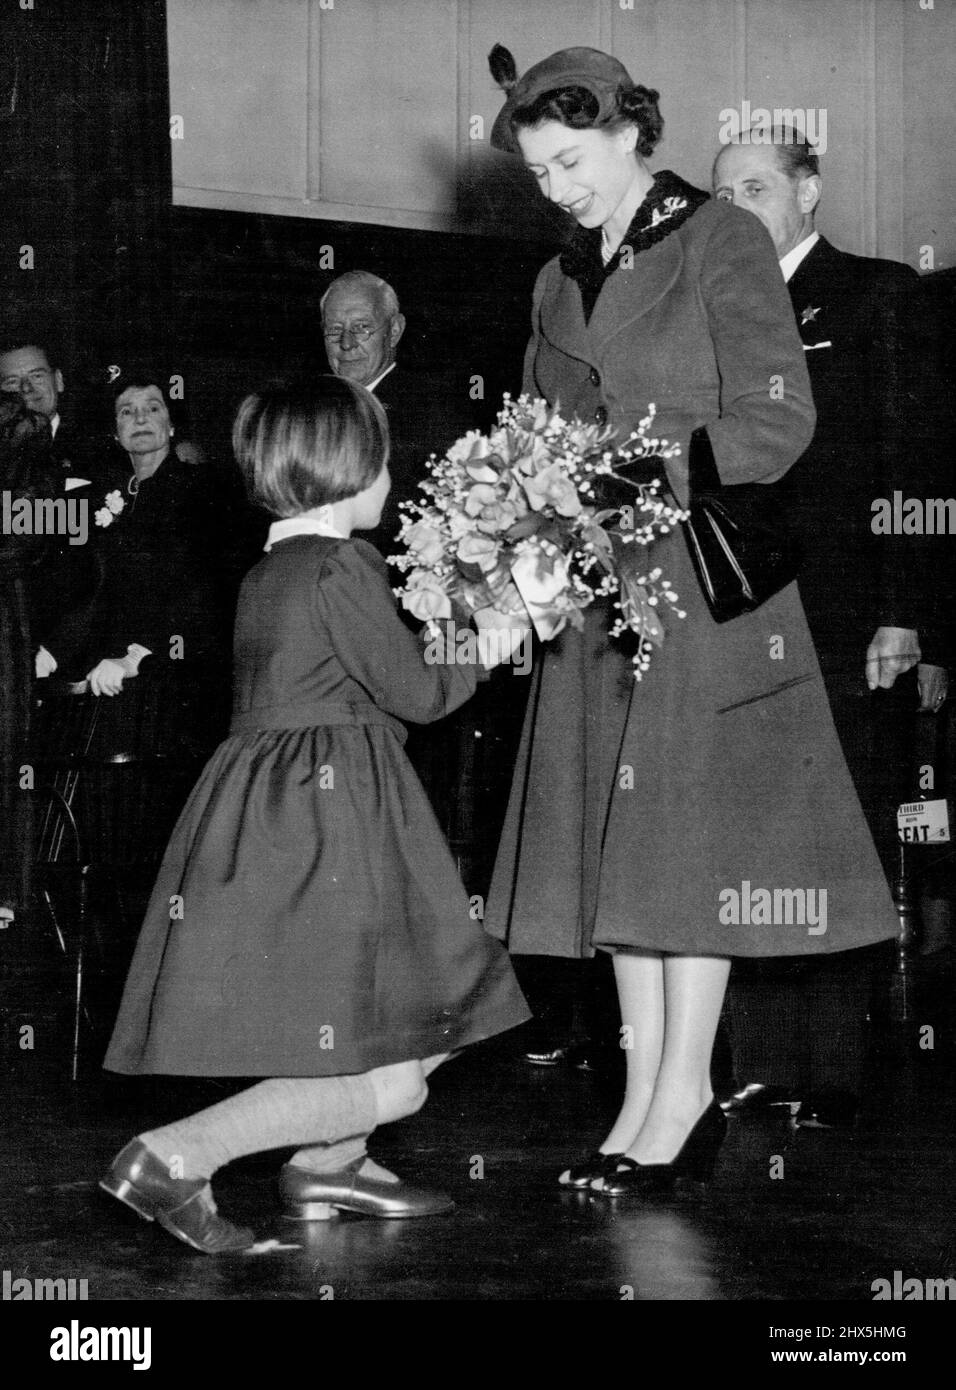 The Queen Visits Girls' School -- Rosemary Kidson, 8, of Leeds, Yorkshire, presents a bouquet to Queen Elizabeth II as Her Majesty arrived at this Royal Masonic School for girls at Rickmansworth, Hertfordshire today March 11. The Queen paid a two-hour visit to the school. There was loud applause when the headmistress, Miss A. Fryer, told the 400 girls that the Queen had asked her if she would allow them an extra day's holiday. March 22, 1955. (Photo by Associated Press Photo). Stock Photo